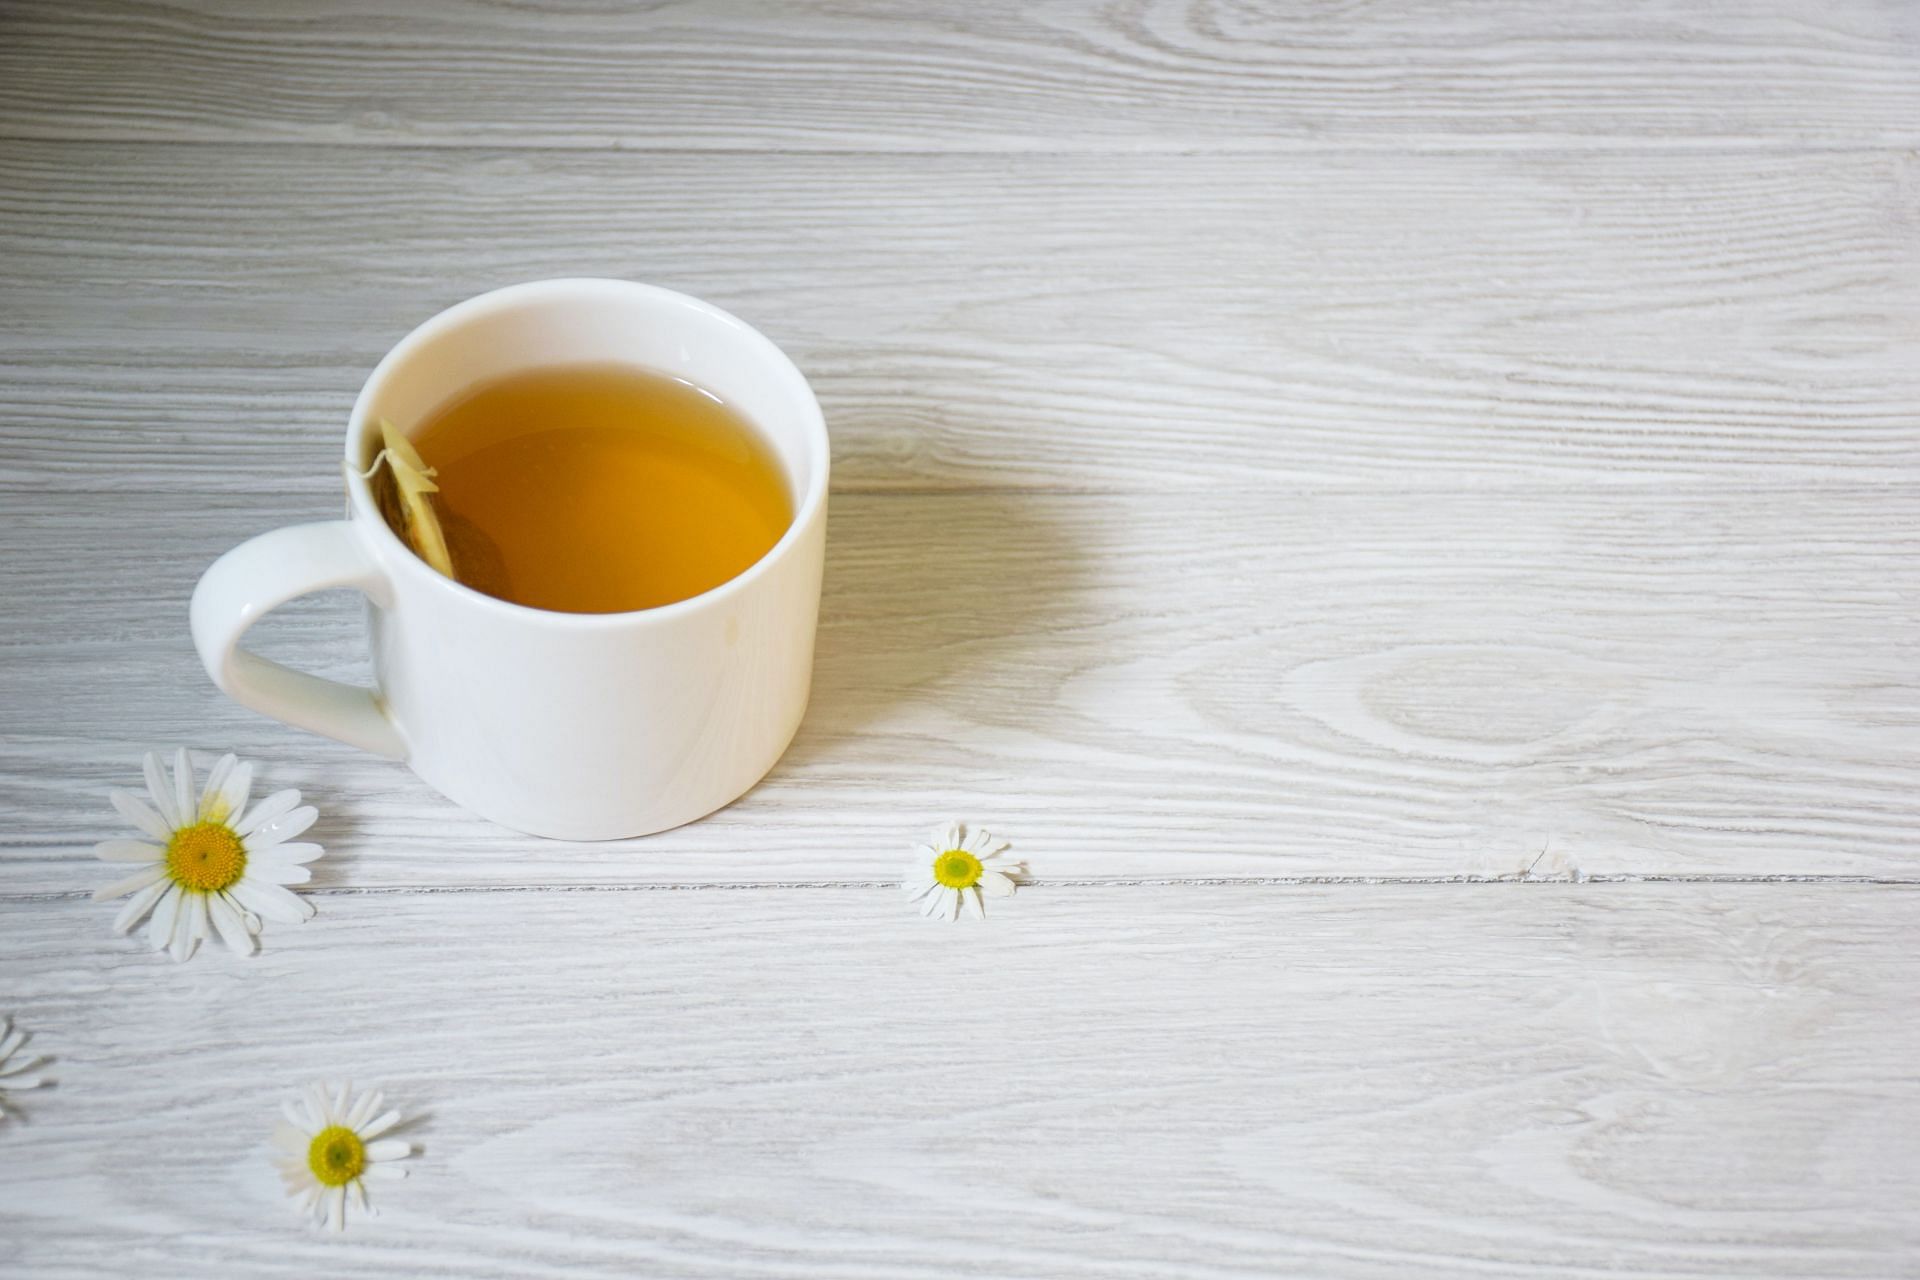 Chamomile tea is good for weight loss and improved sleep. (Image via Unsplash/Catia Climovich)